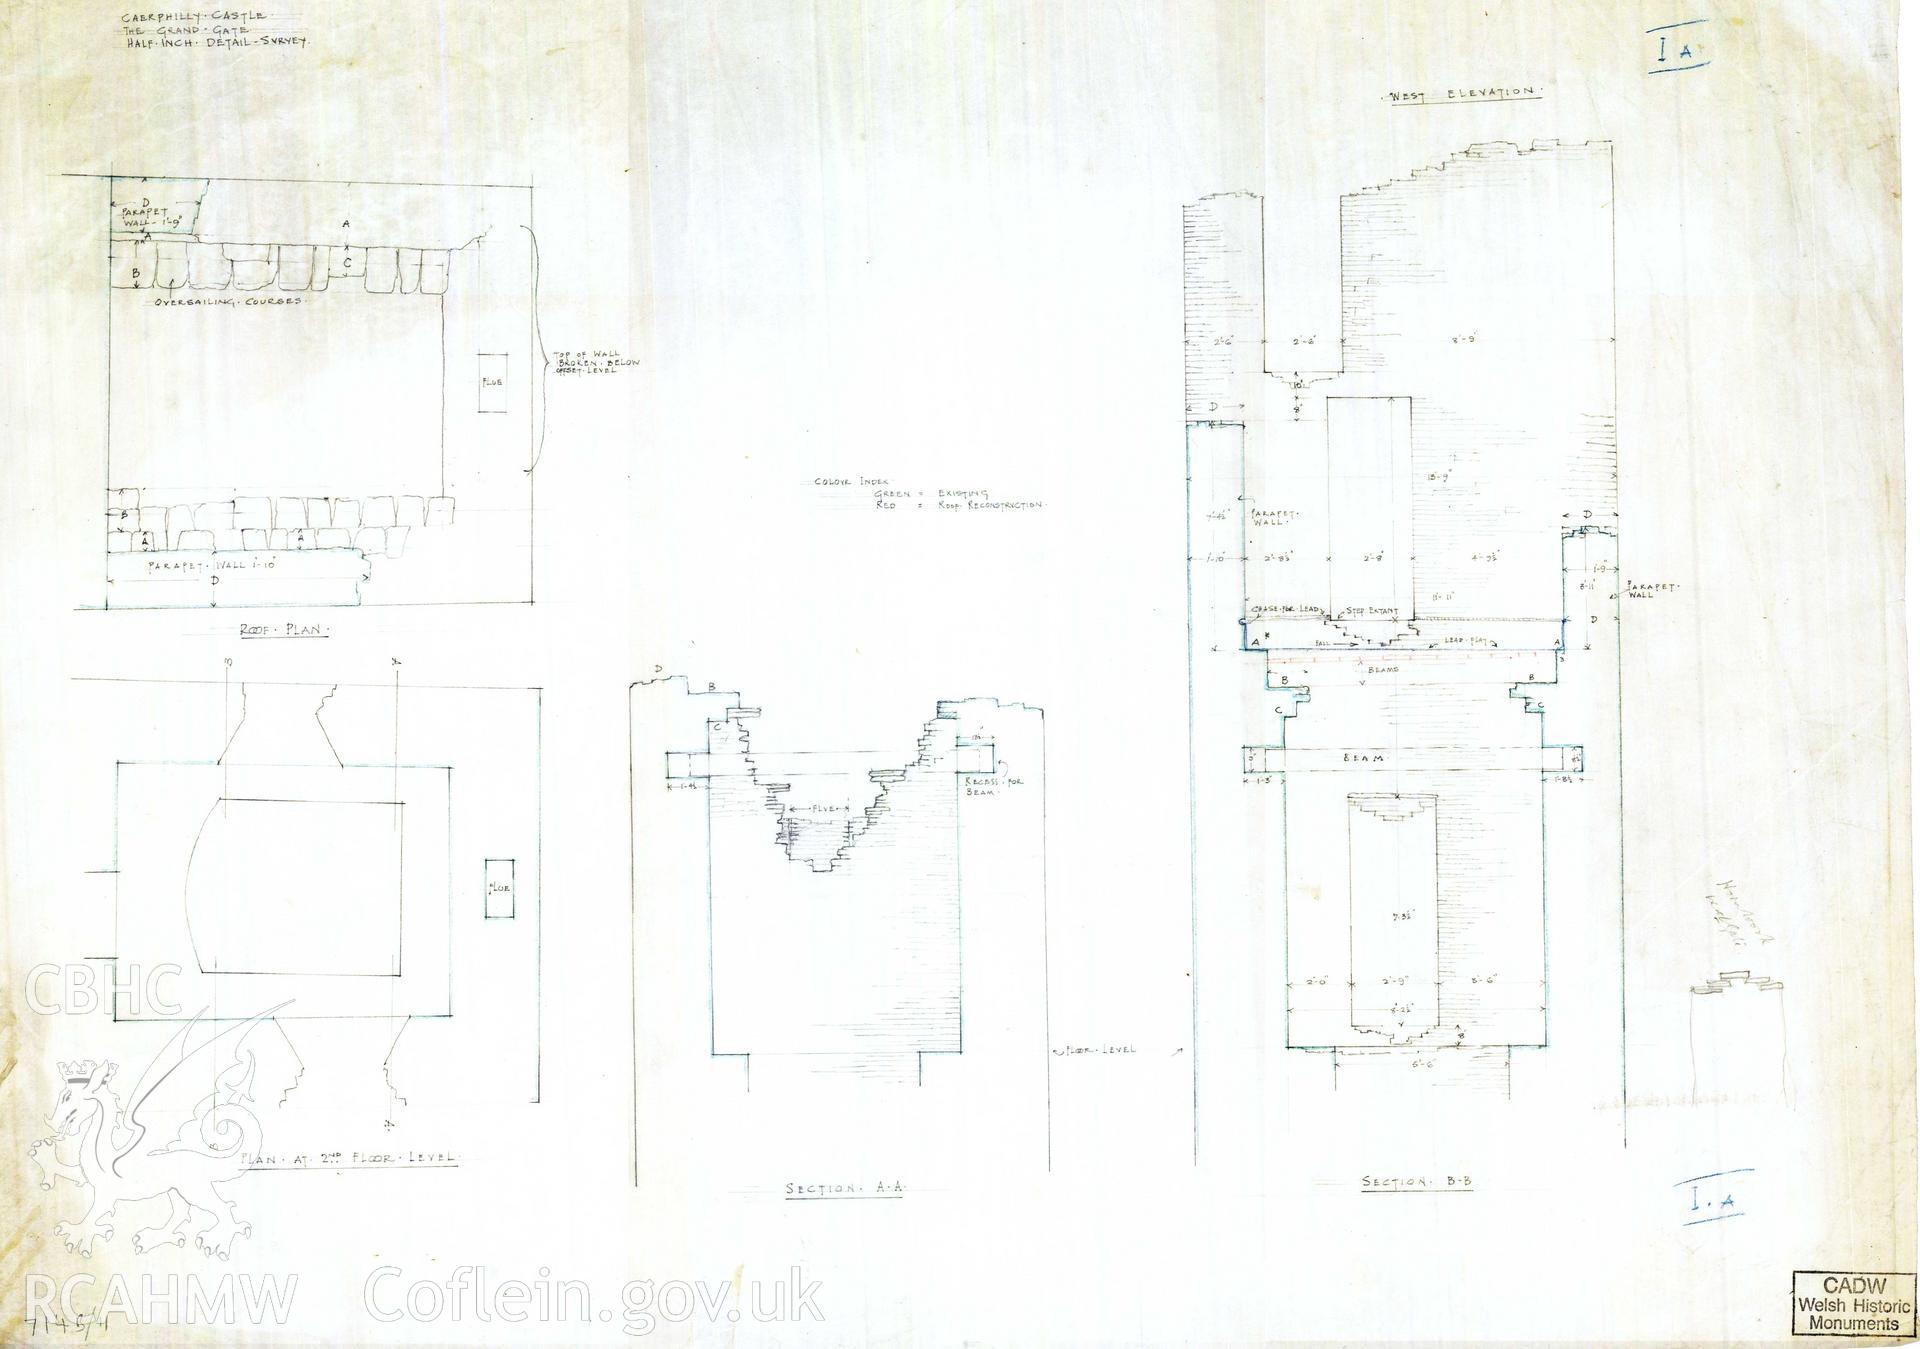 Digital copy of Cadw guardianship monument drawing of Caerphilly Castle. Outer E gate, NW part, sections. Cadw ref. no: 714B/11. Scale 1:24.  Original drawing withdrawn and returned to Cadw at their request.